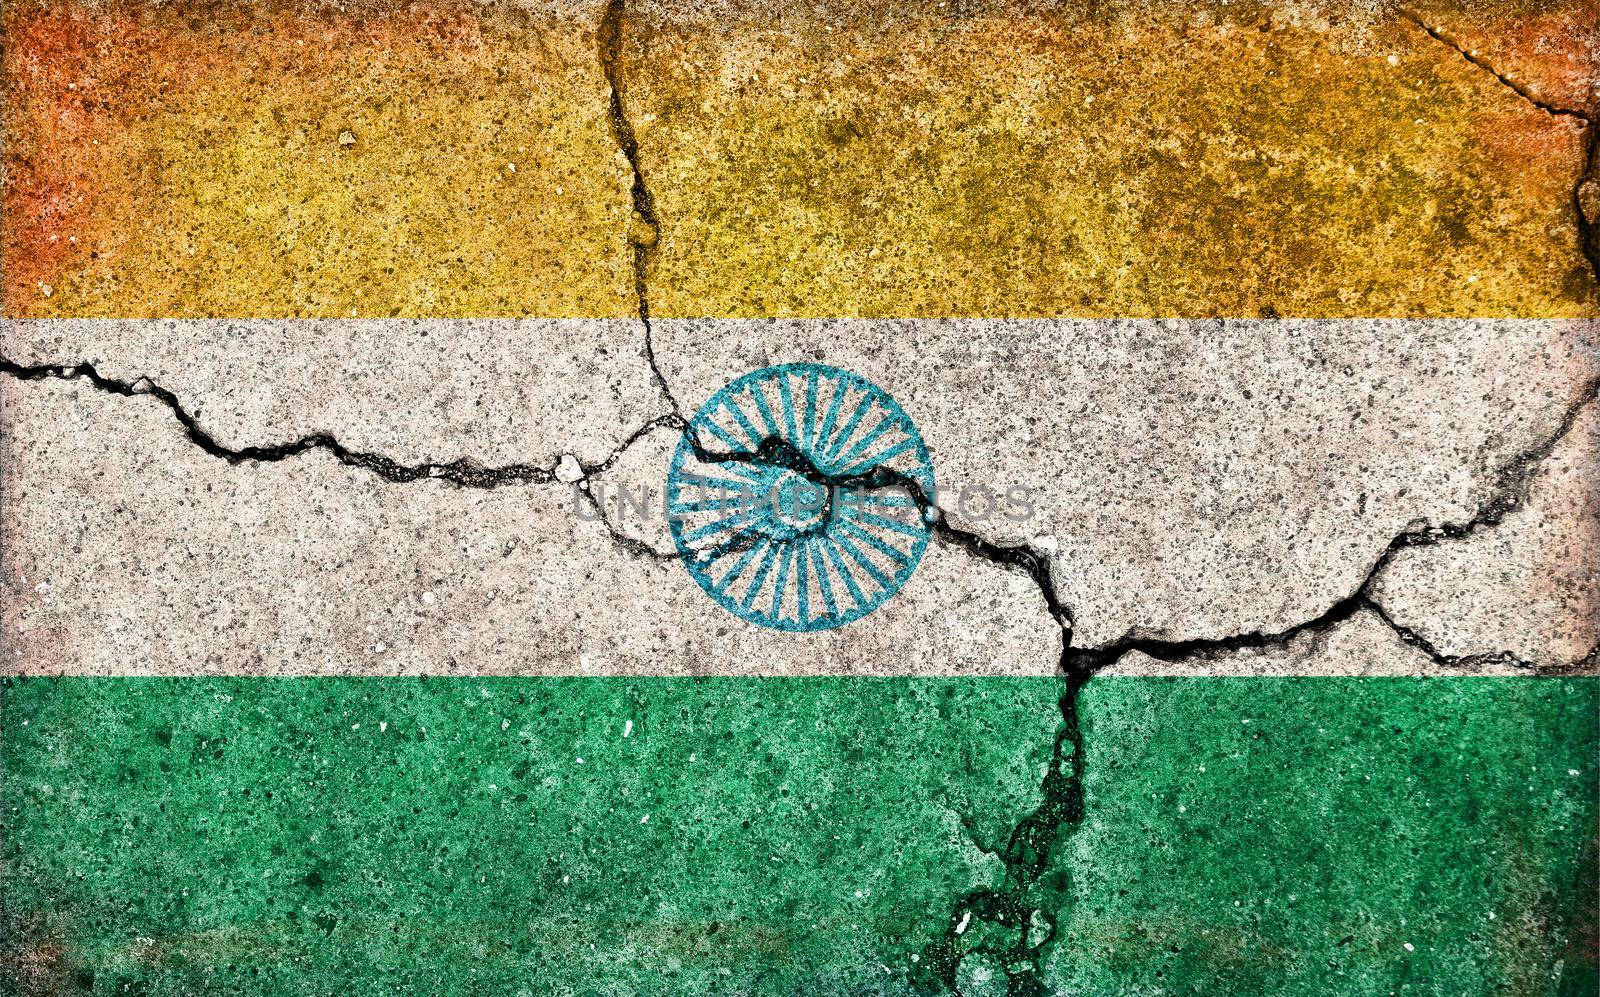 Grunge country flag illustration (cracked concrete background) / India by barks